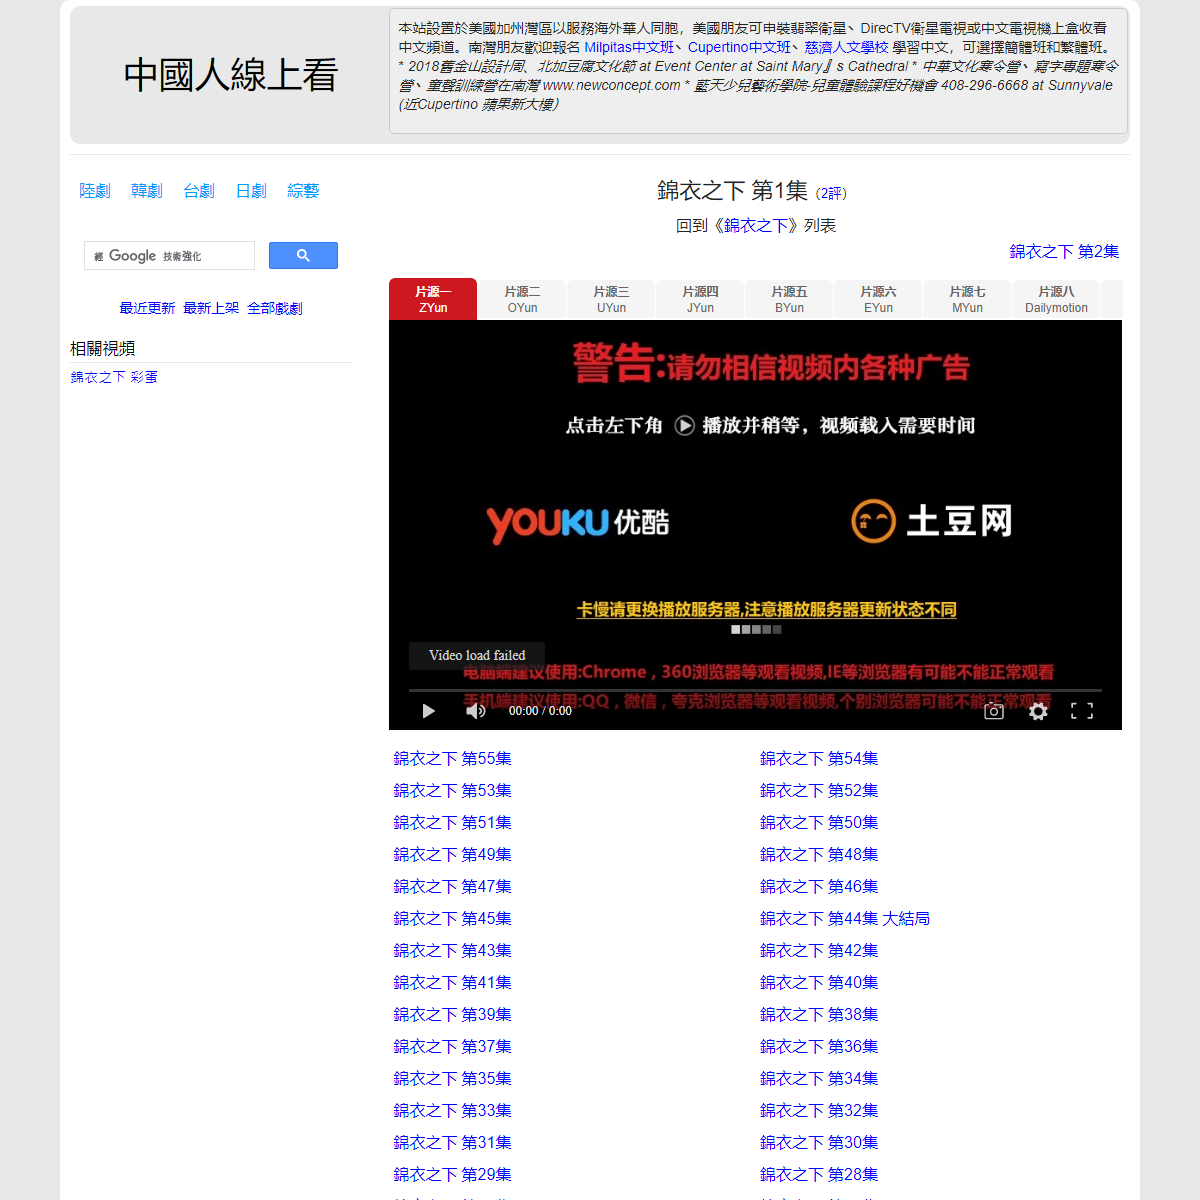 A complete backup of https://chinaq.tv/cn191228/1.html